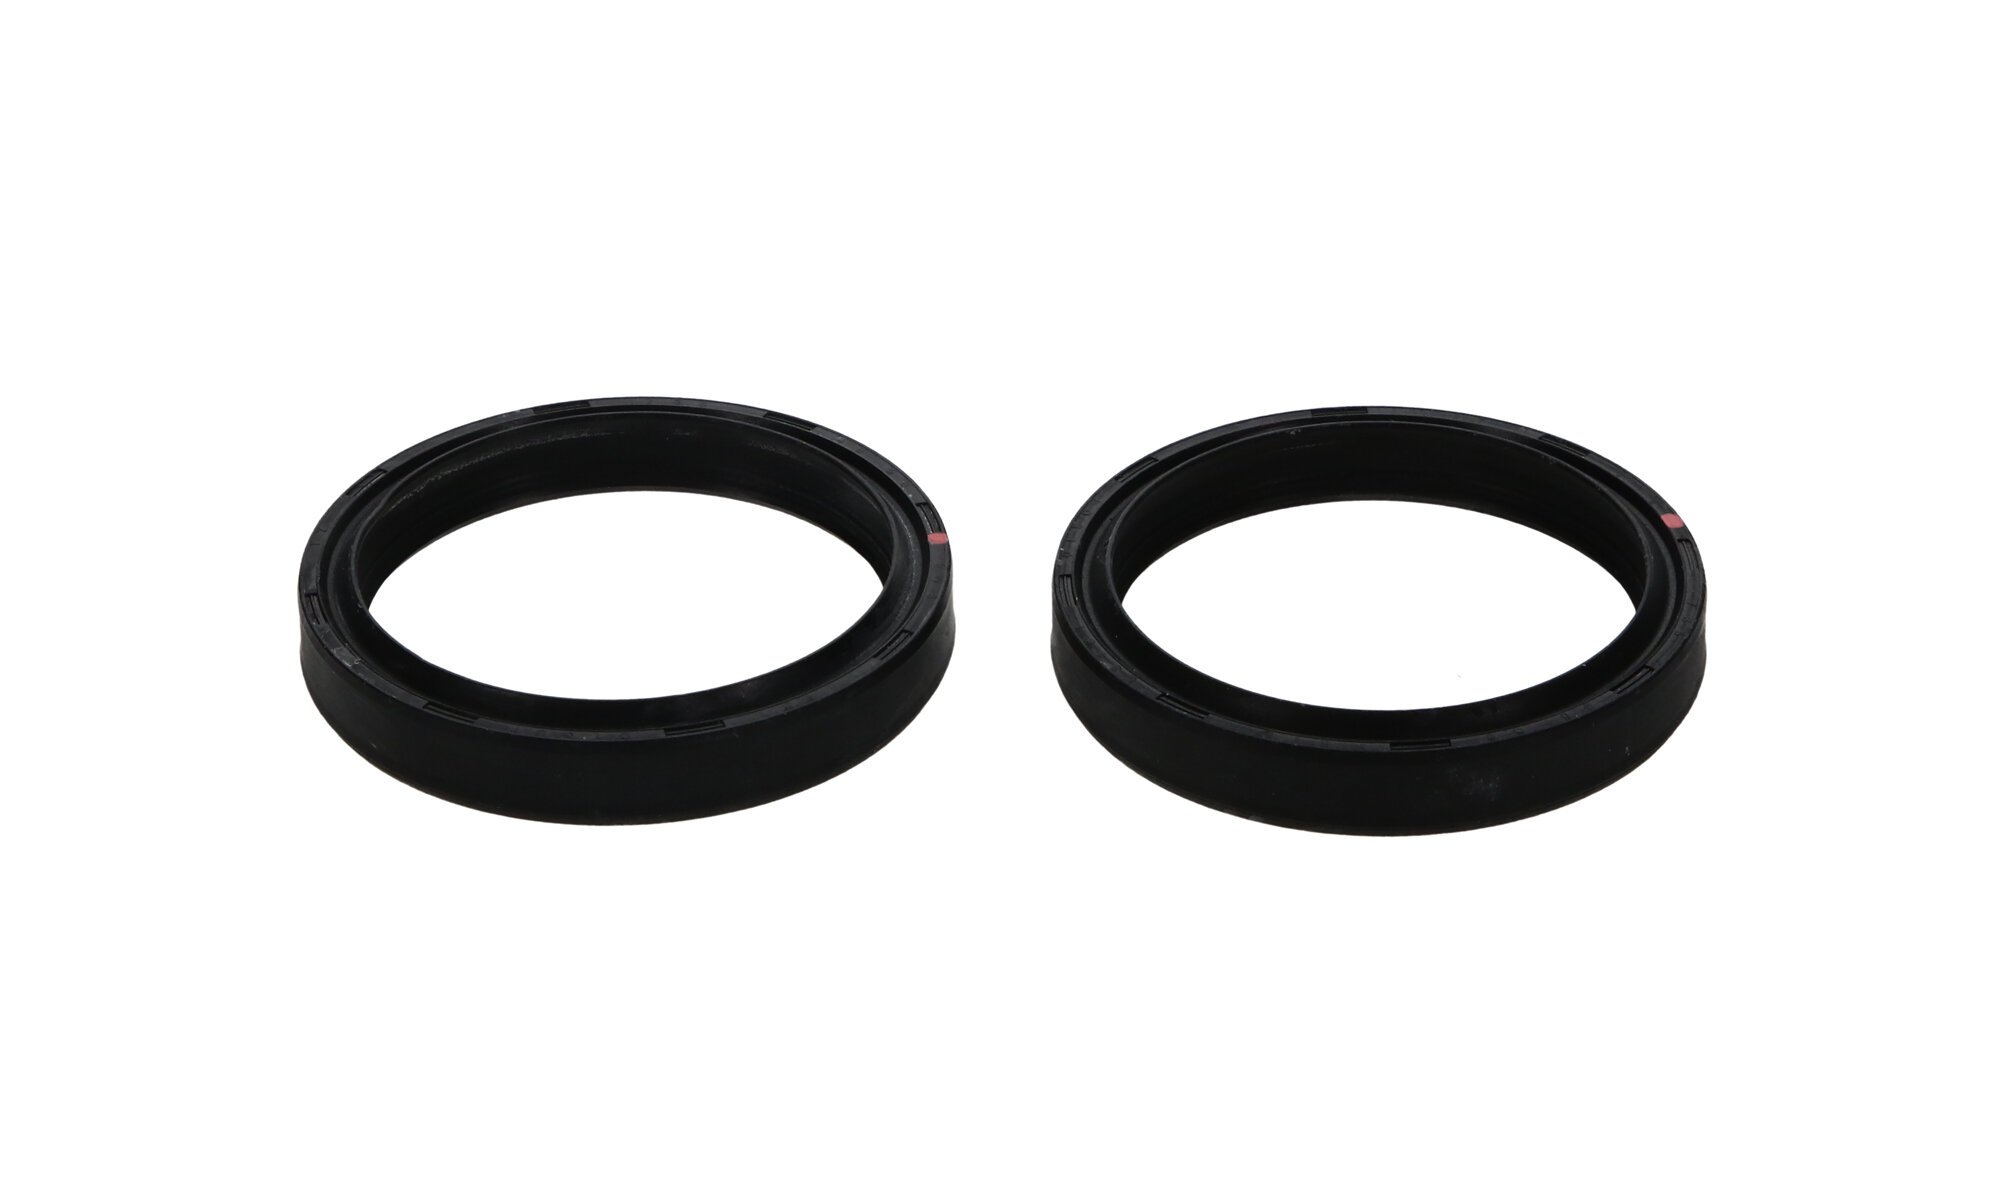 Shop OEM Replacement Fork Seal Set KX450F + CRF450R Kay. PSF